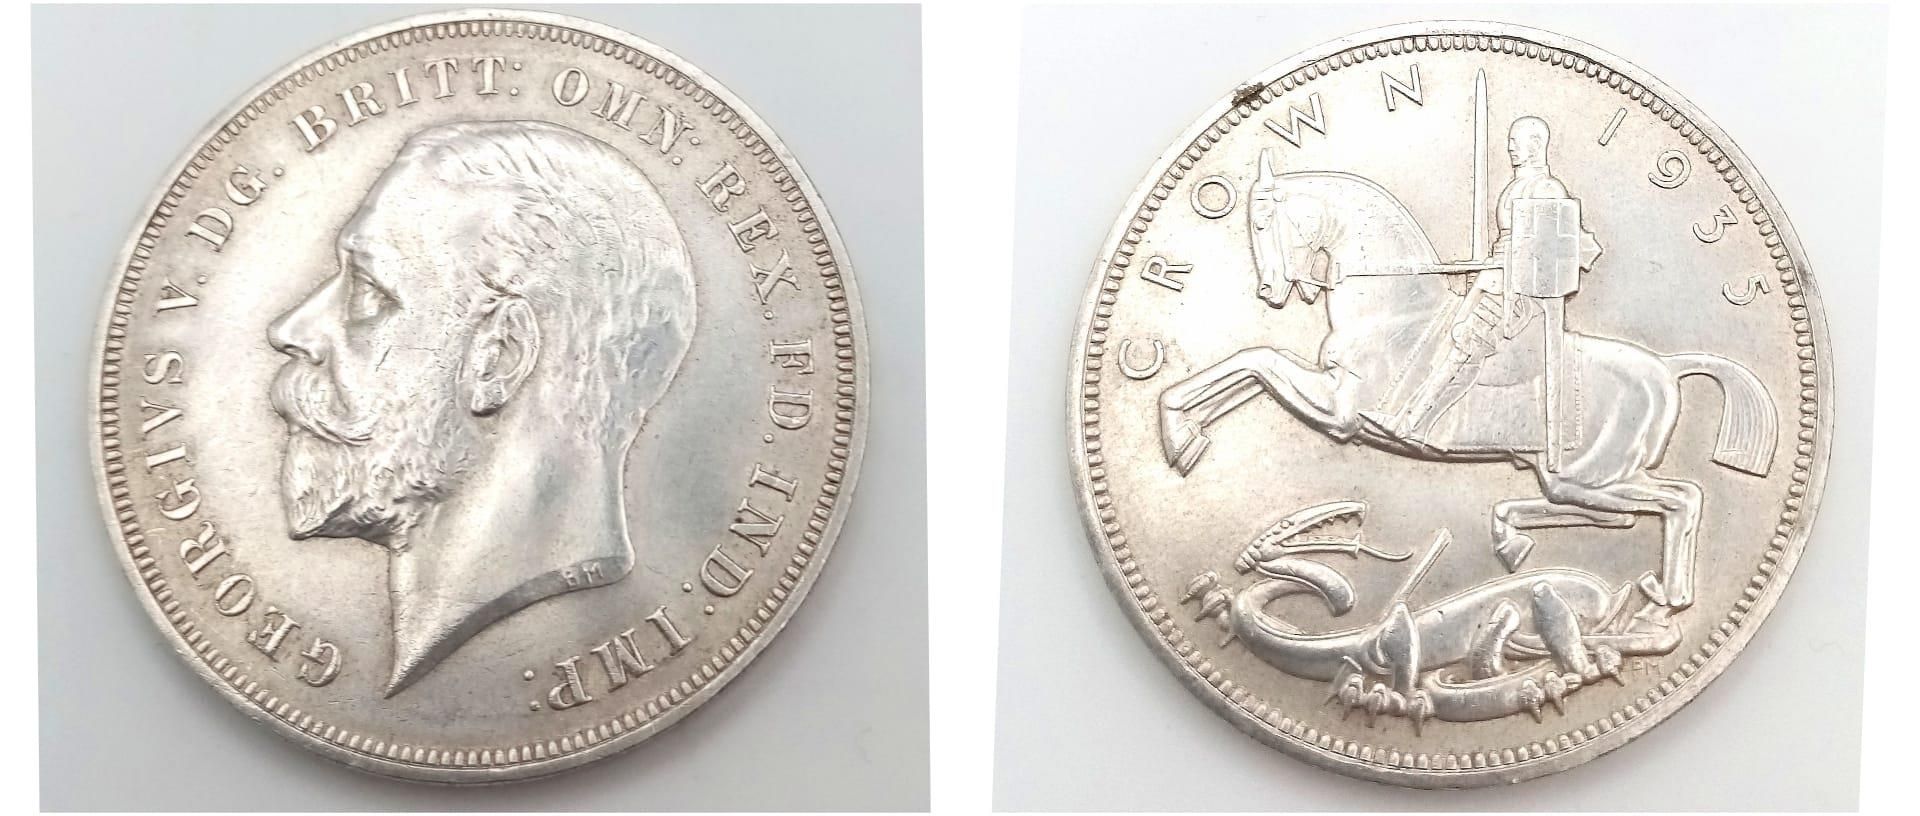 A 1935 George V Silver Rocking Horse Crown Coin. EF grade but please see photos.